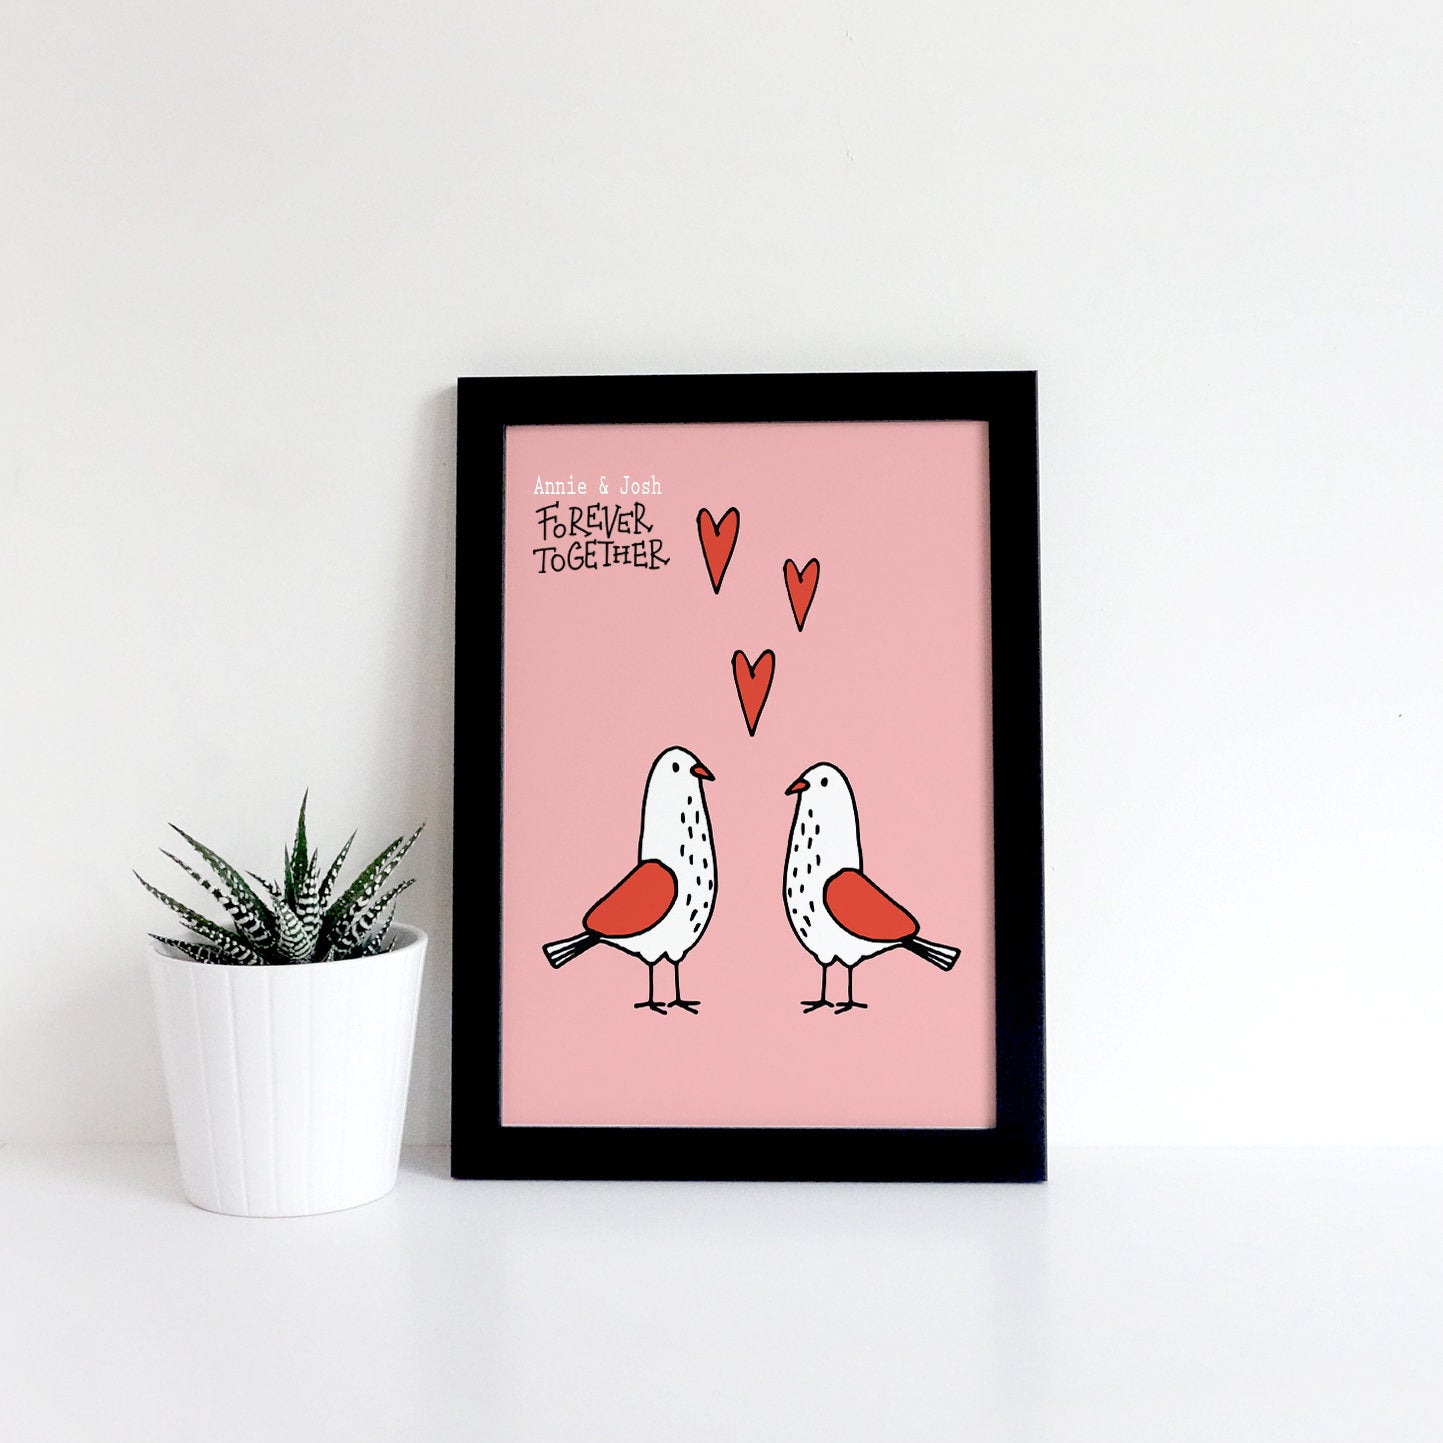 Seagulls in Love Poster